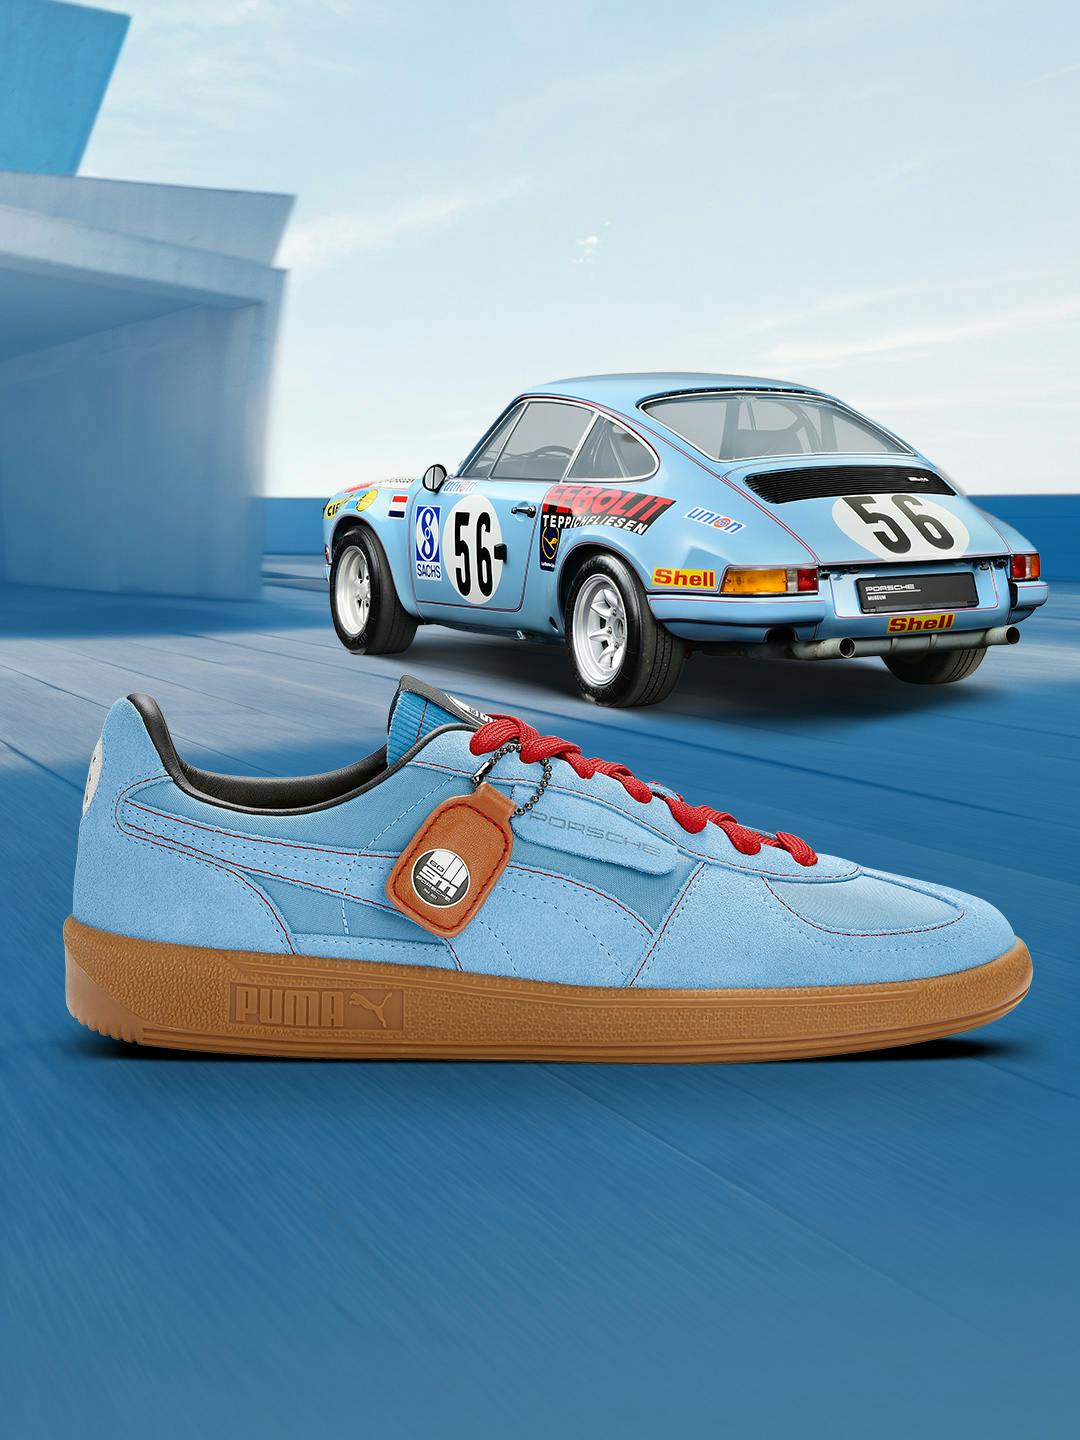 You can see a flat blue Puma sneaker from the side with a brown rubber sole in cooperation with Porsche and in the background there is a blue-coloured vintage car with colourful decorations.